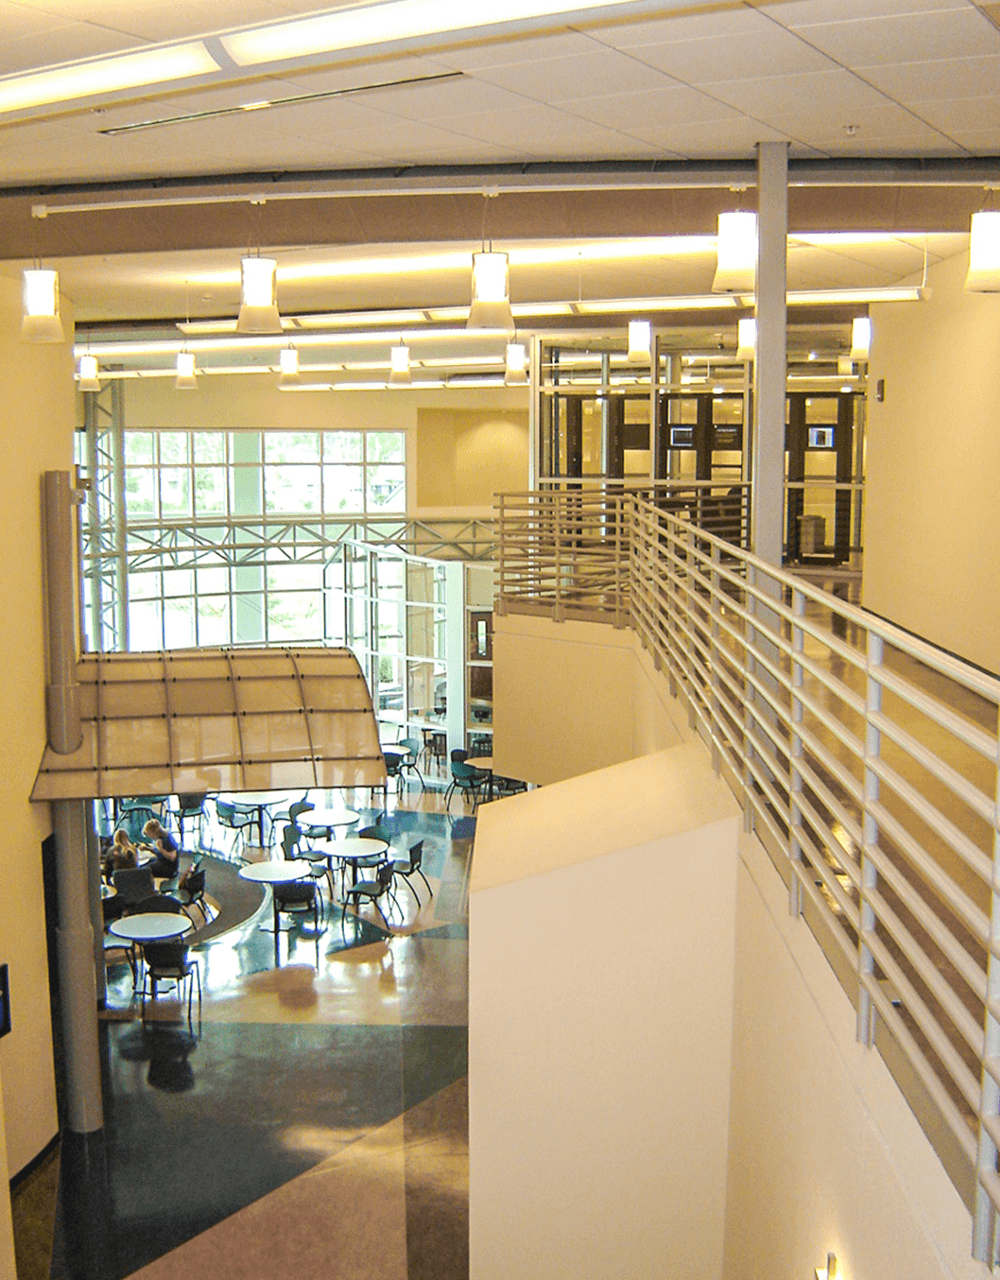 THE CLARK ADVANCED LEARNING CENTER Florida Architects